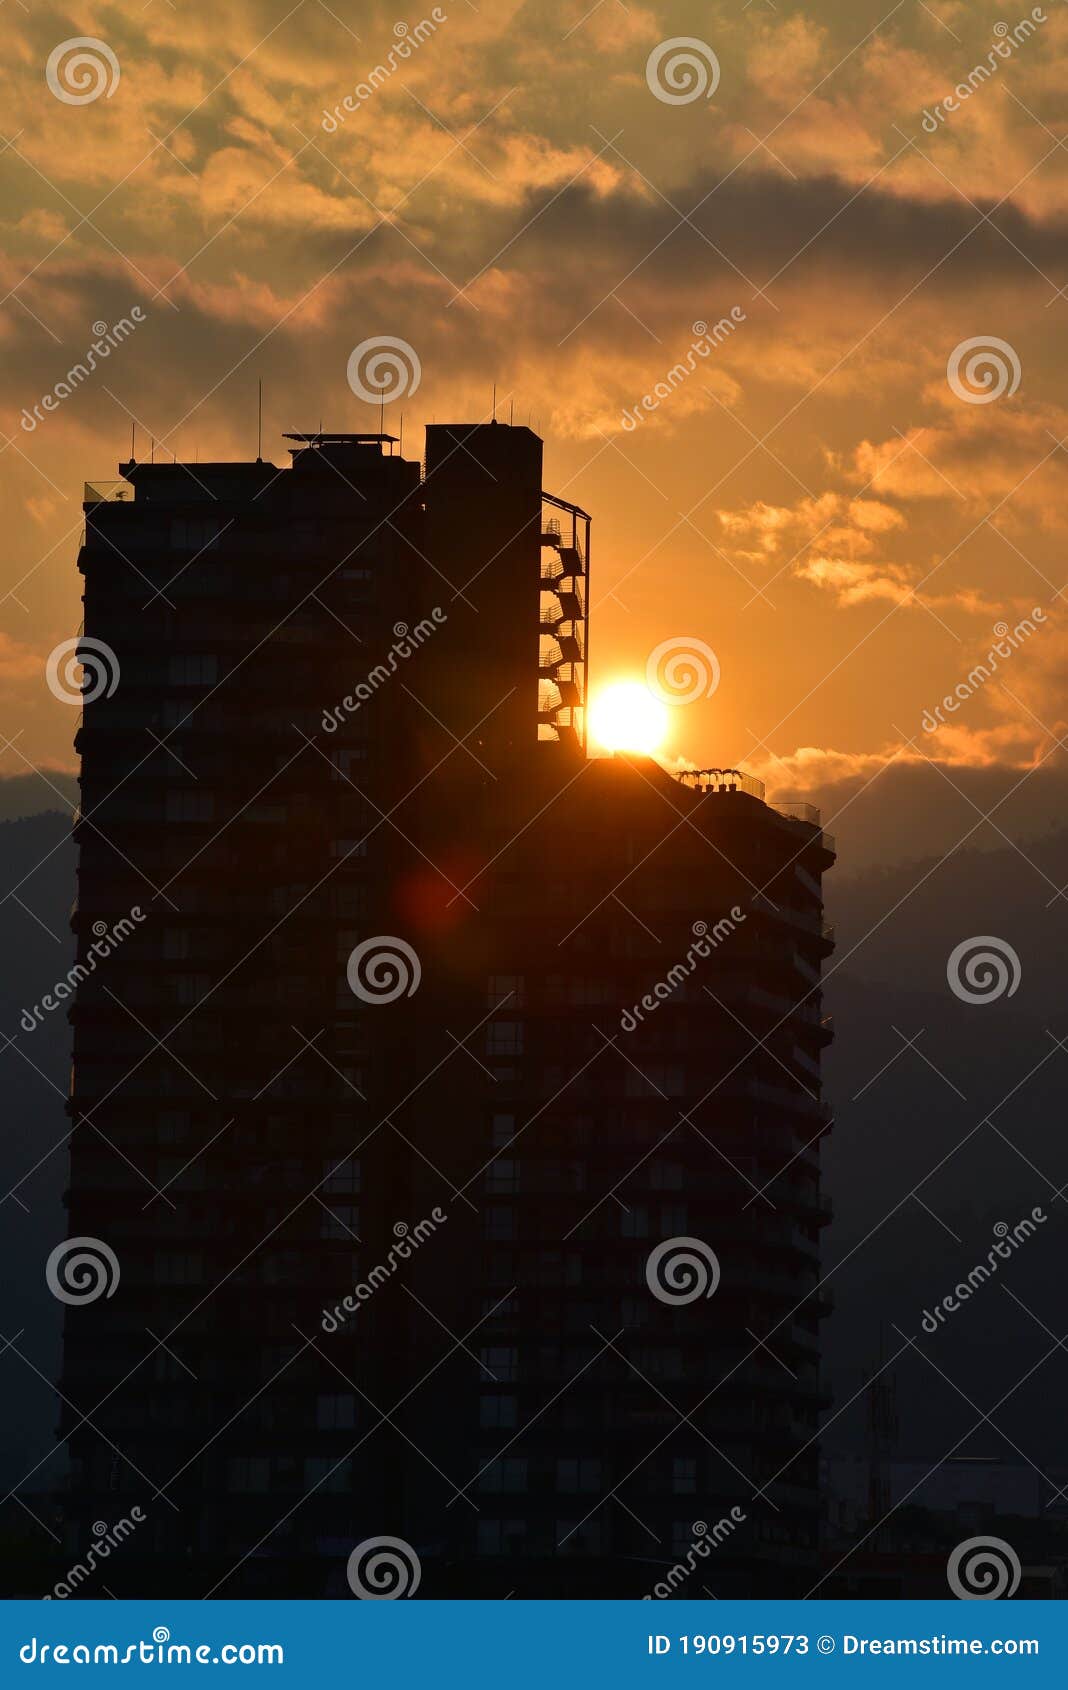 sunset reflection in building